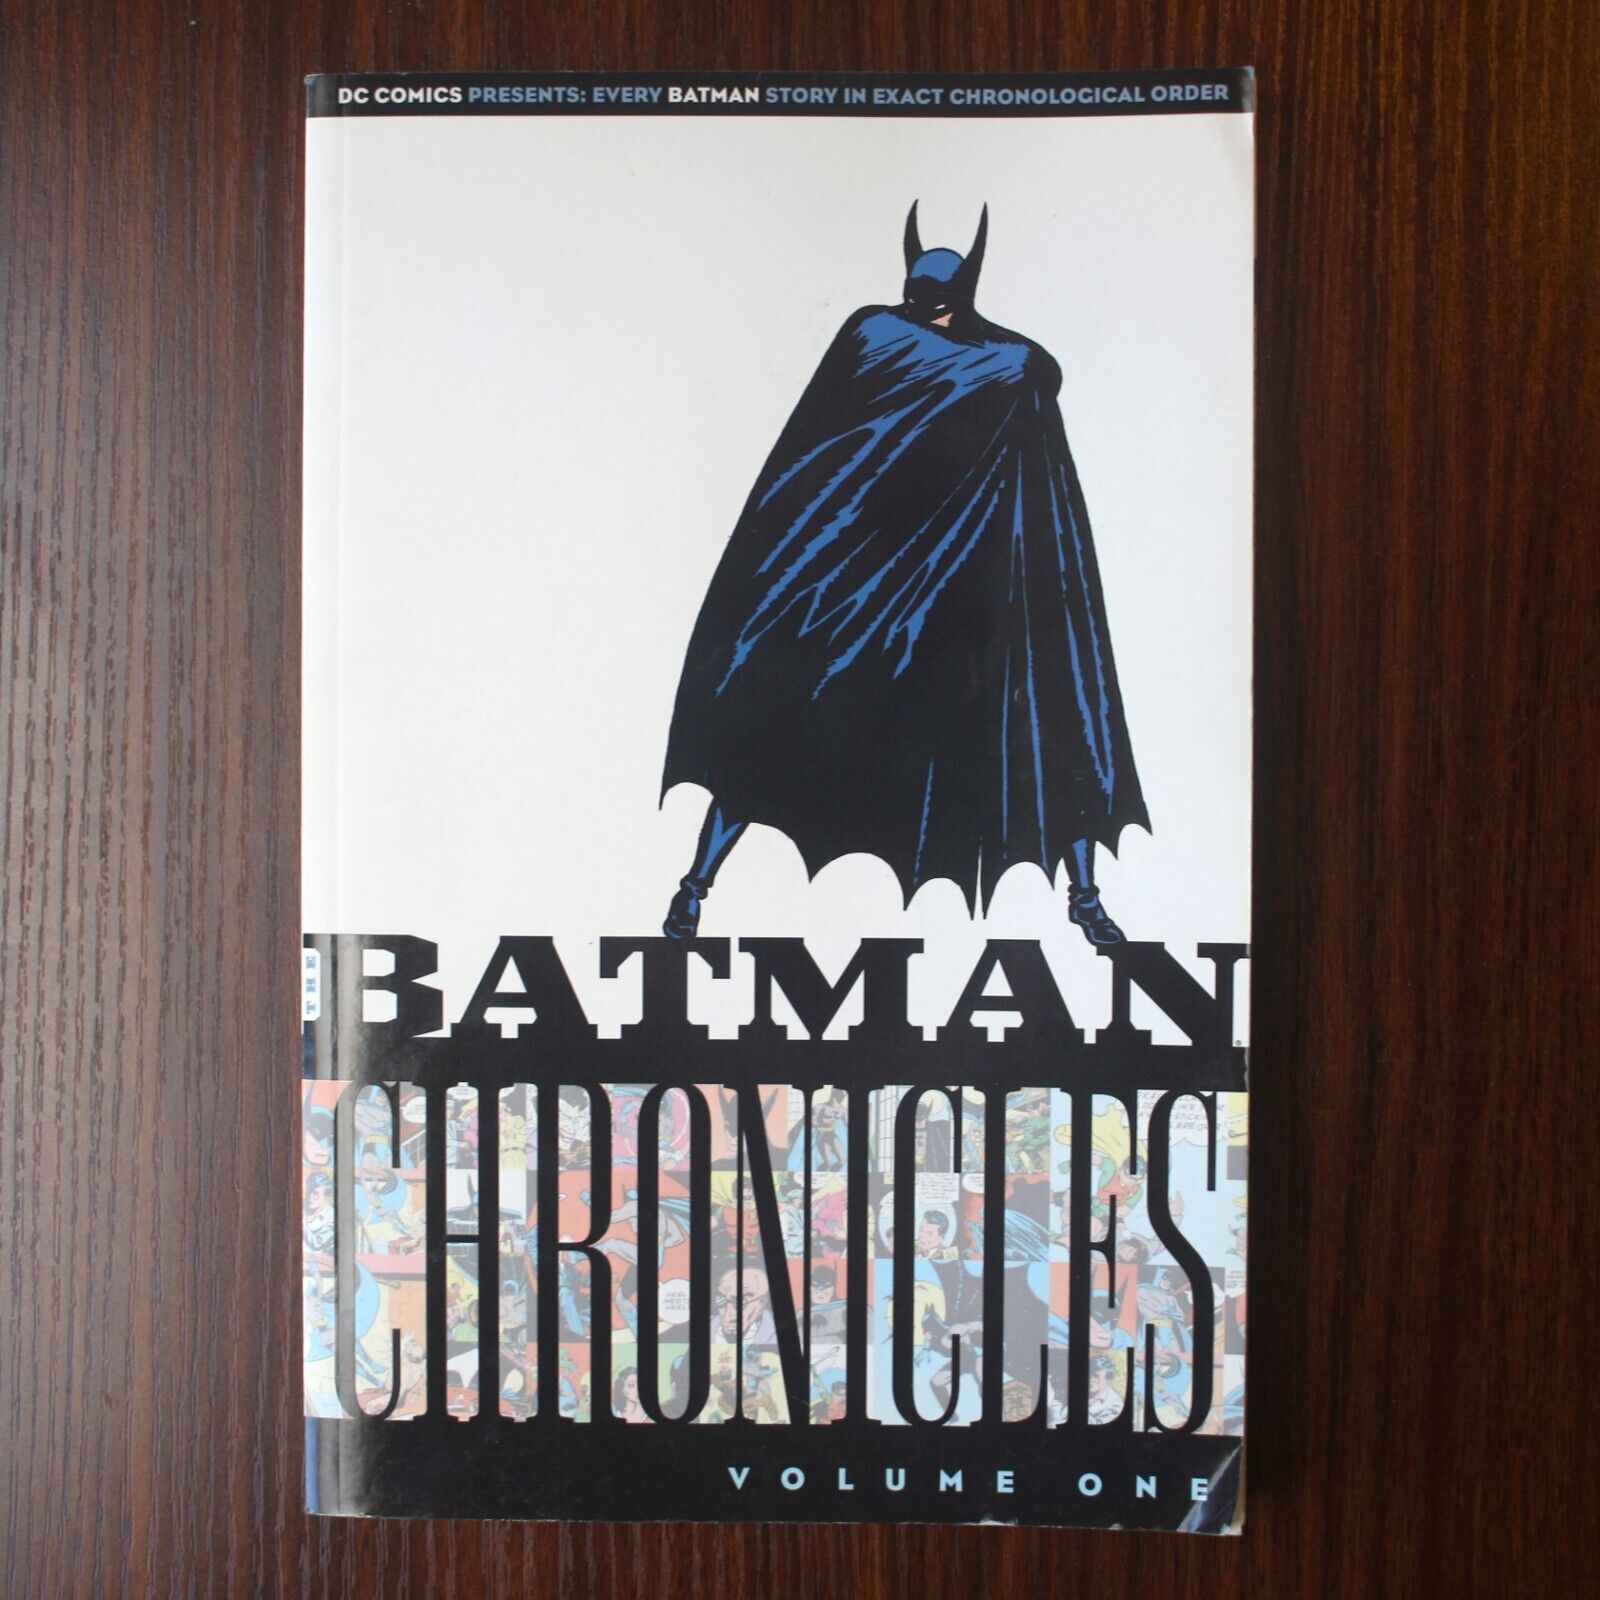 The Batman Chronicles Volume 1 - 2005 - Includes first ever Batman story.